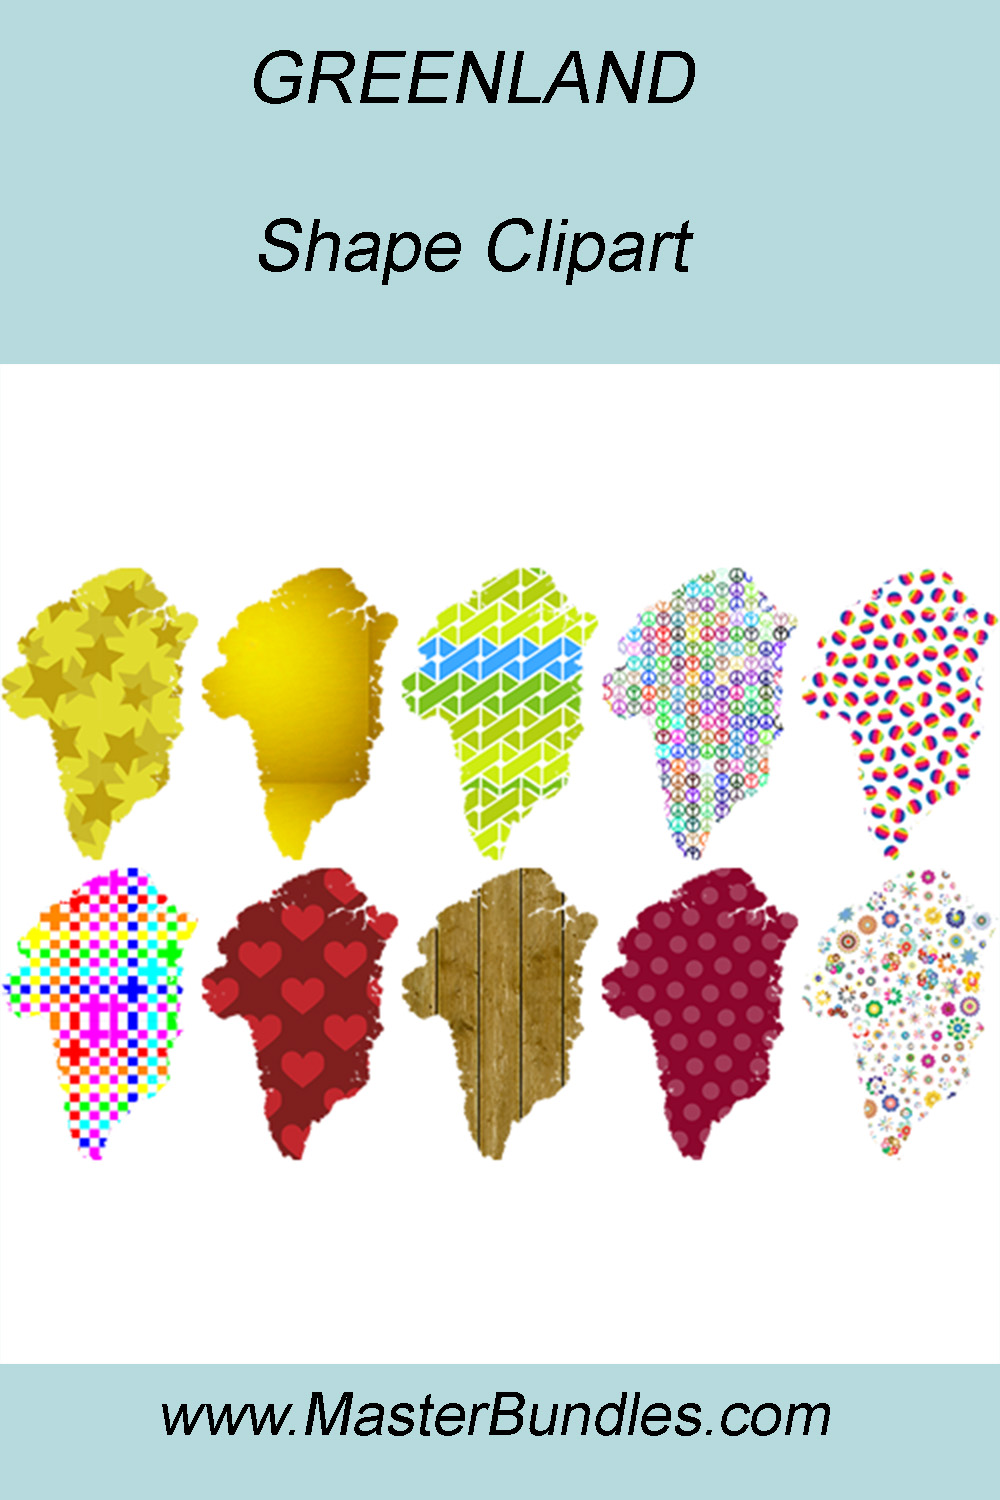 GREENLAND SHAPE CLIPART ICONS pinterest preview image.